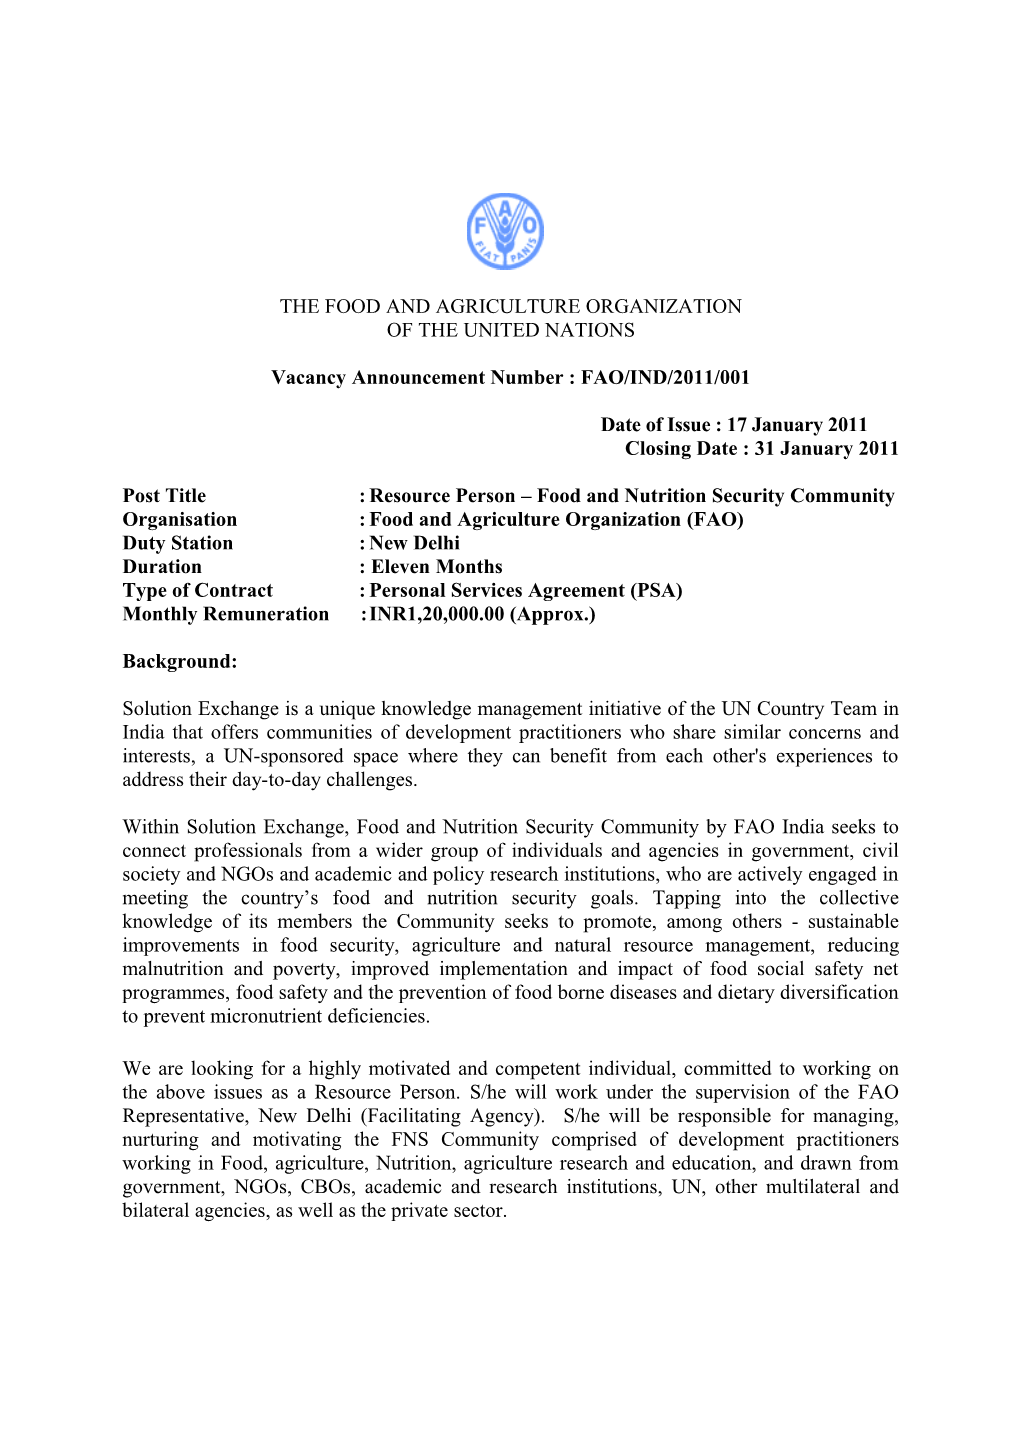 Vacancy Announcement Number : FAO/IND/2011/001